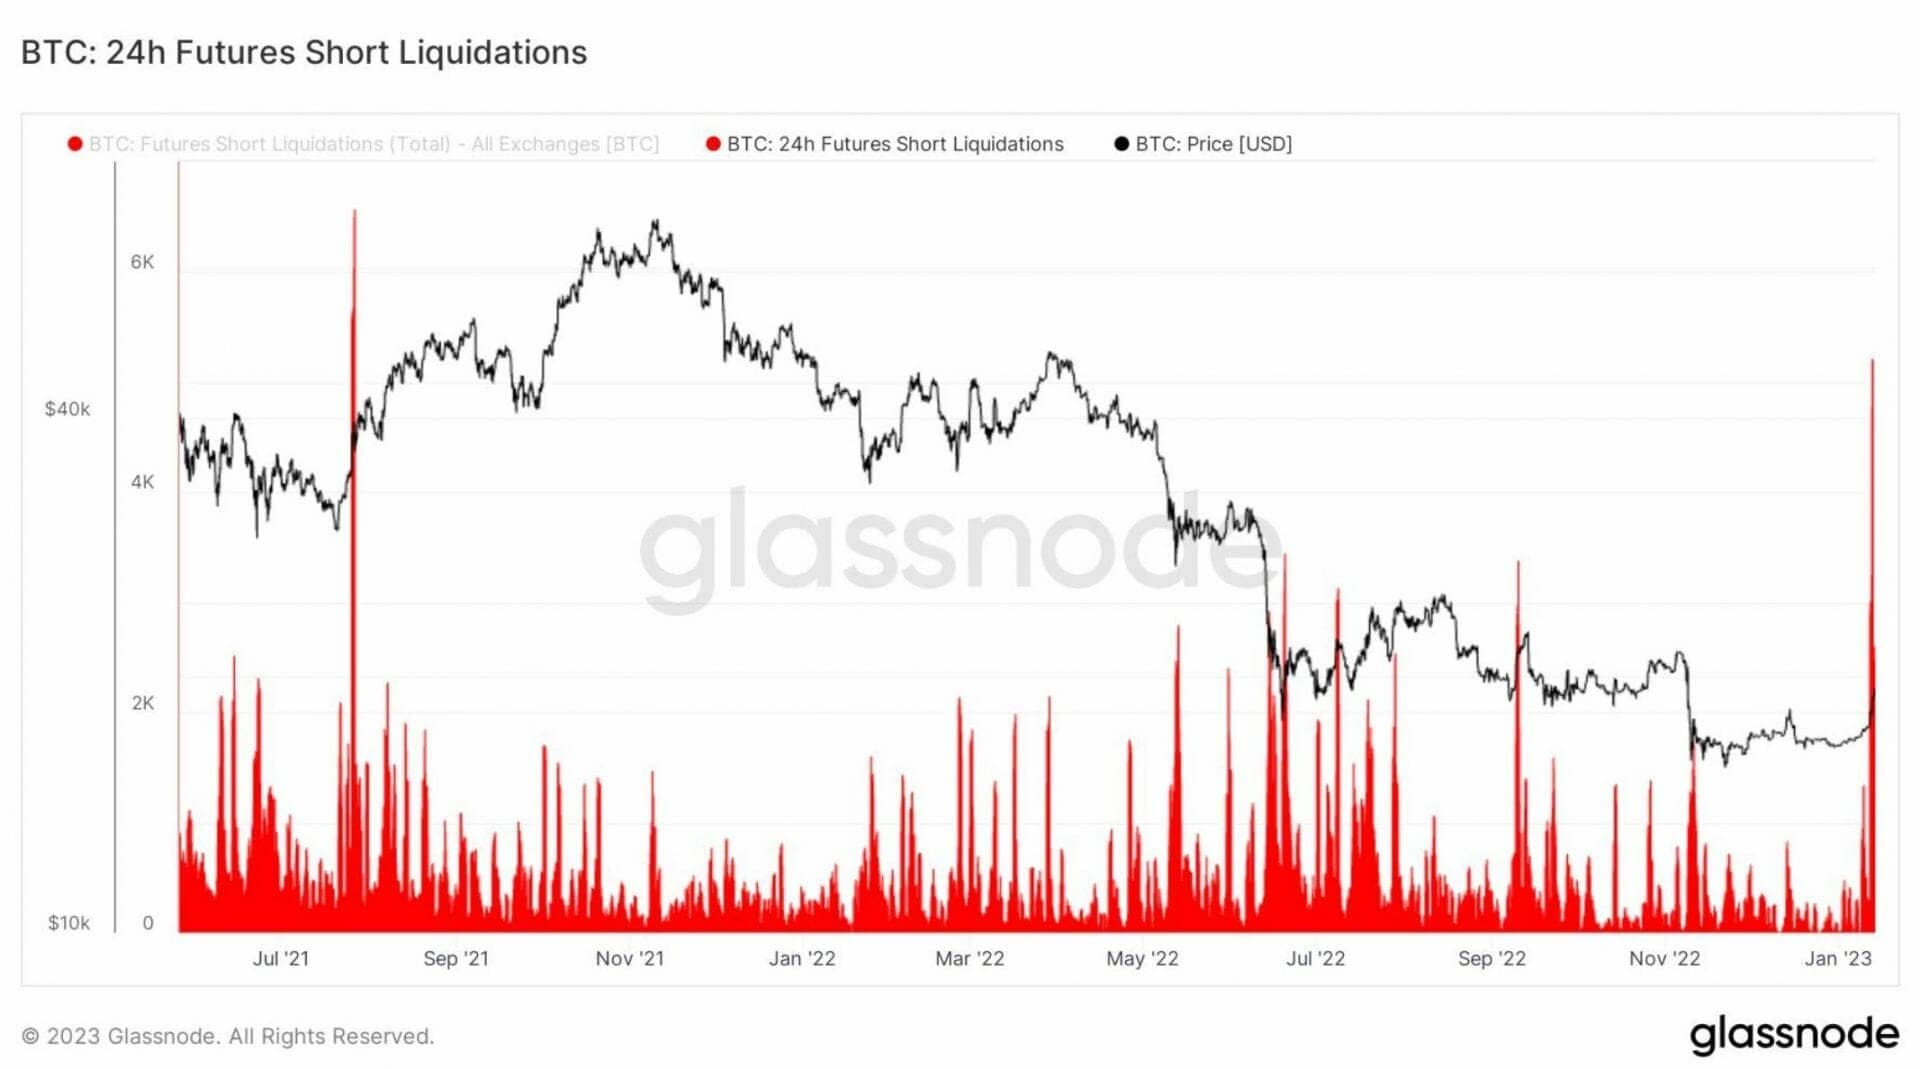 The peak in liquidations is the largest since July 2021.